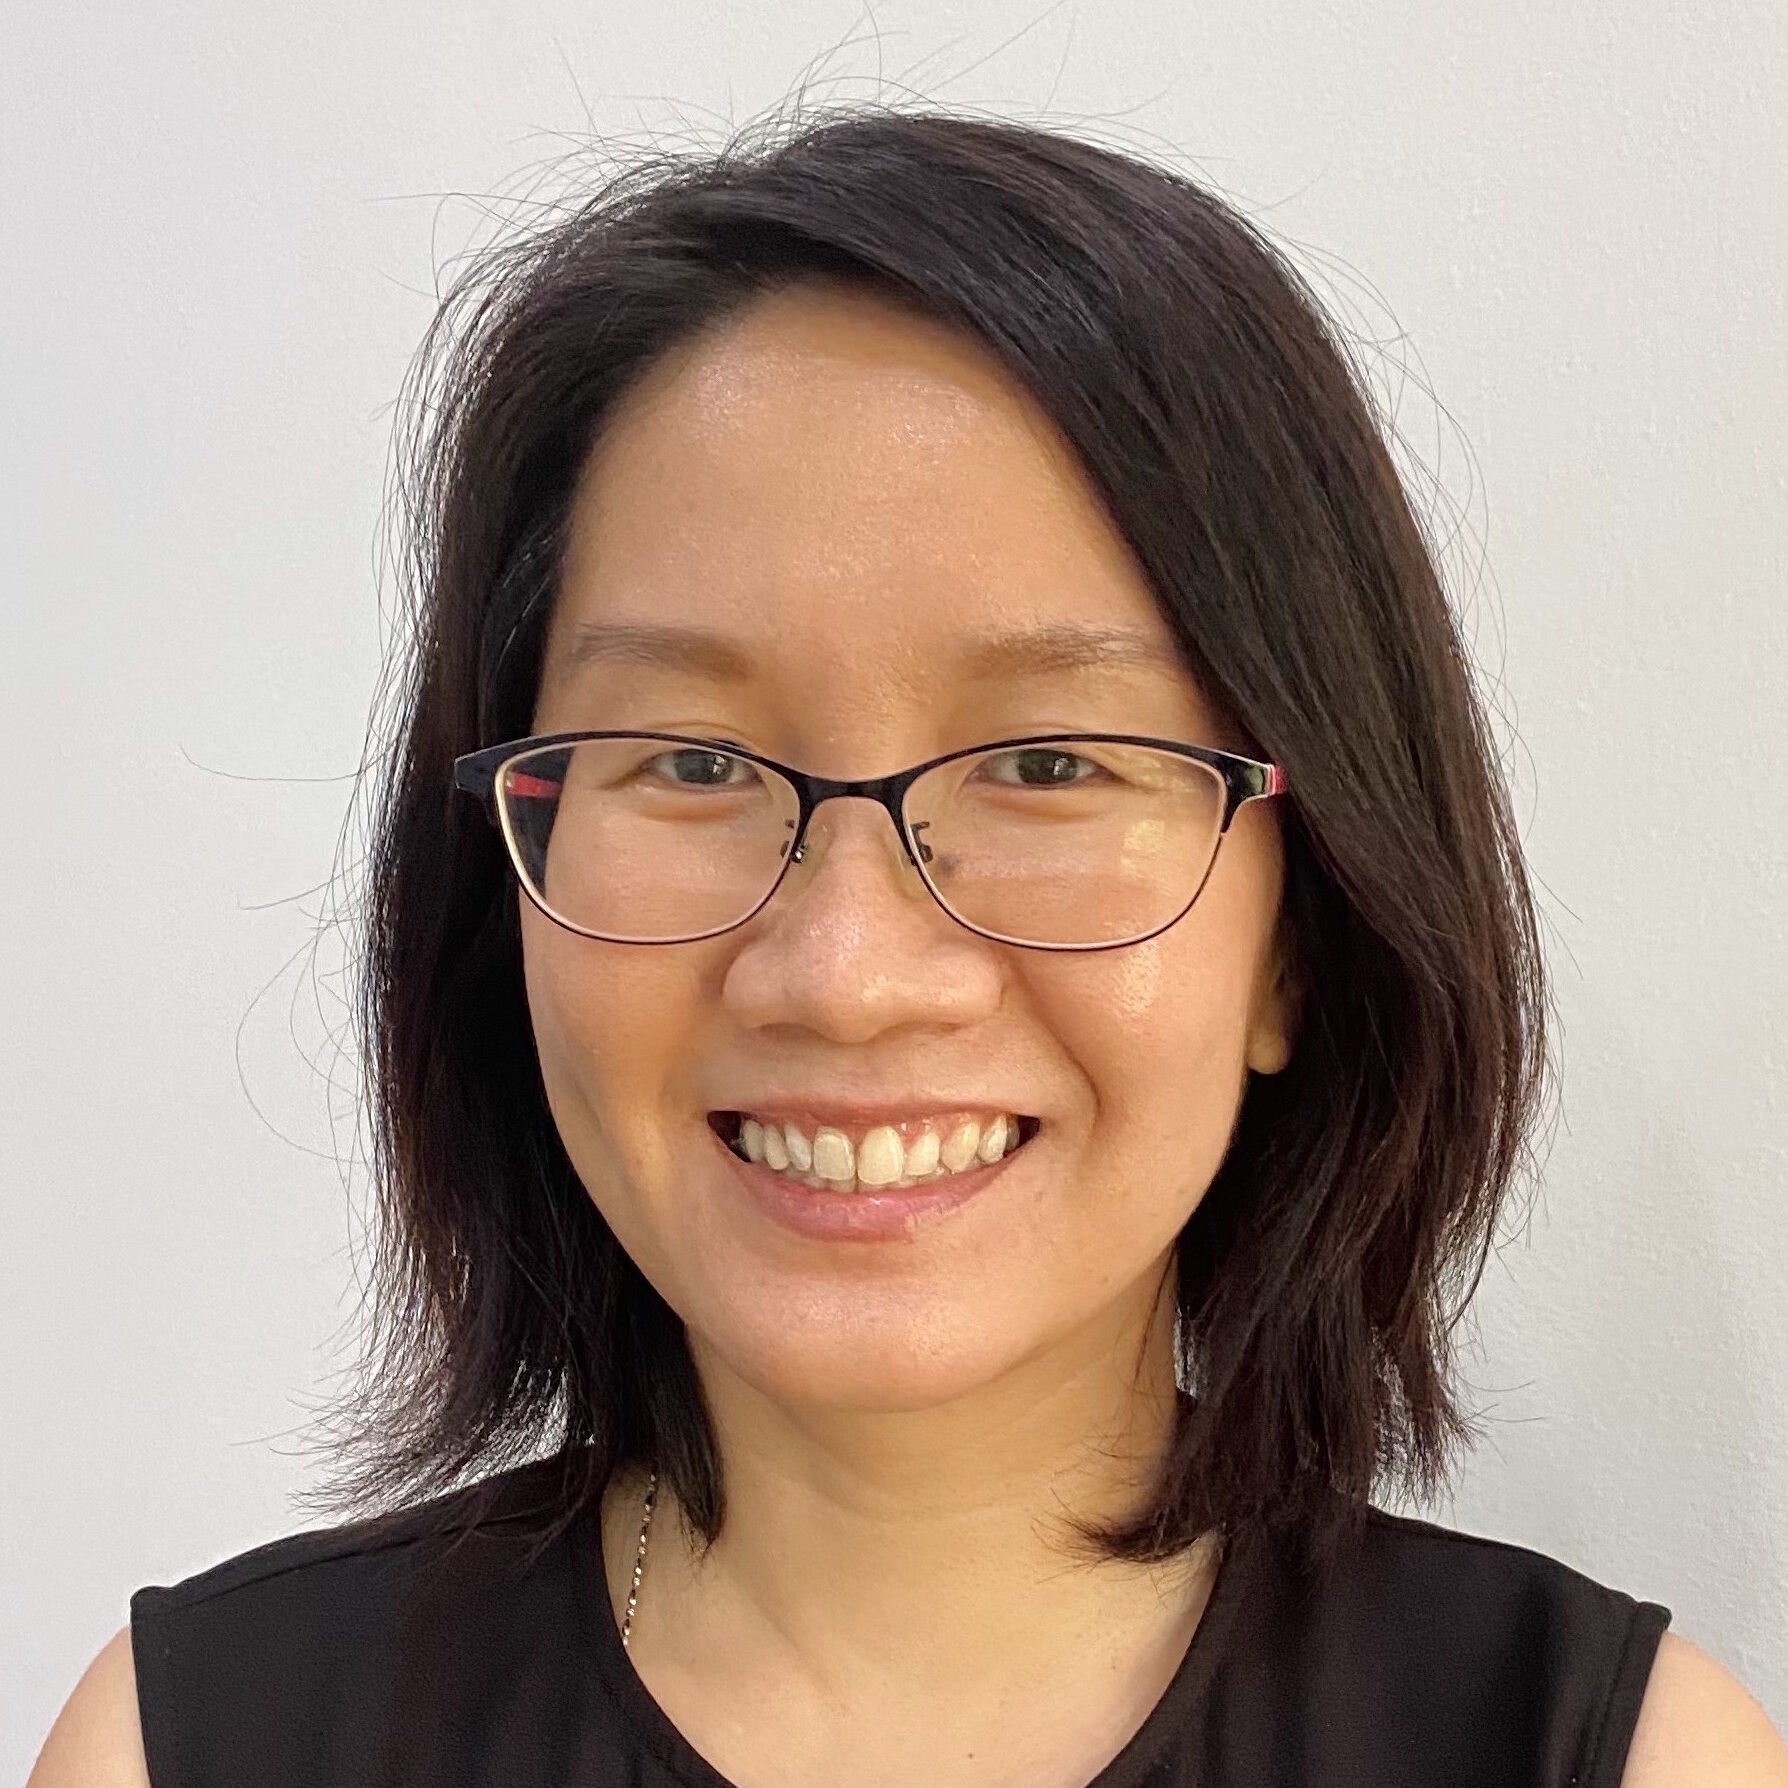 Yuyun Tan has over 14 years experience in working with children, adolescents, and adults. She also conducts mediation between couples and family members.